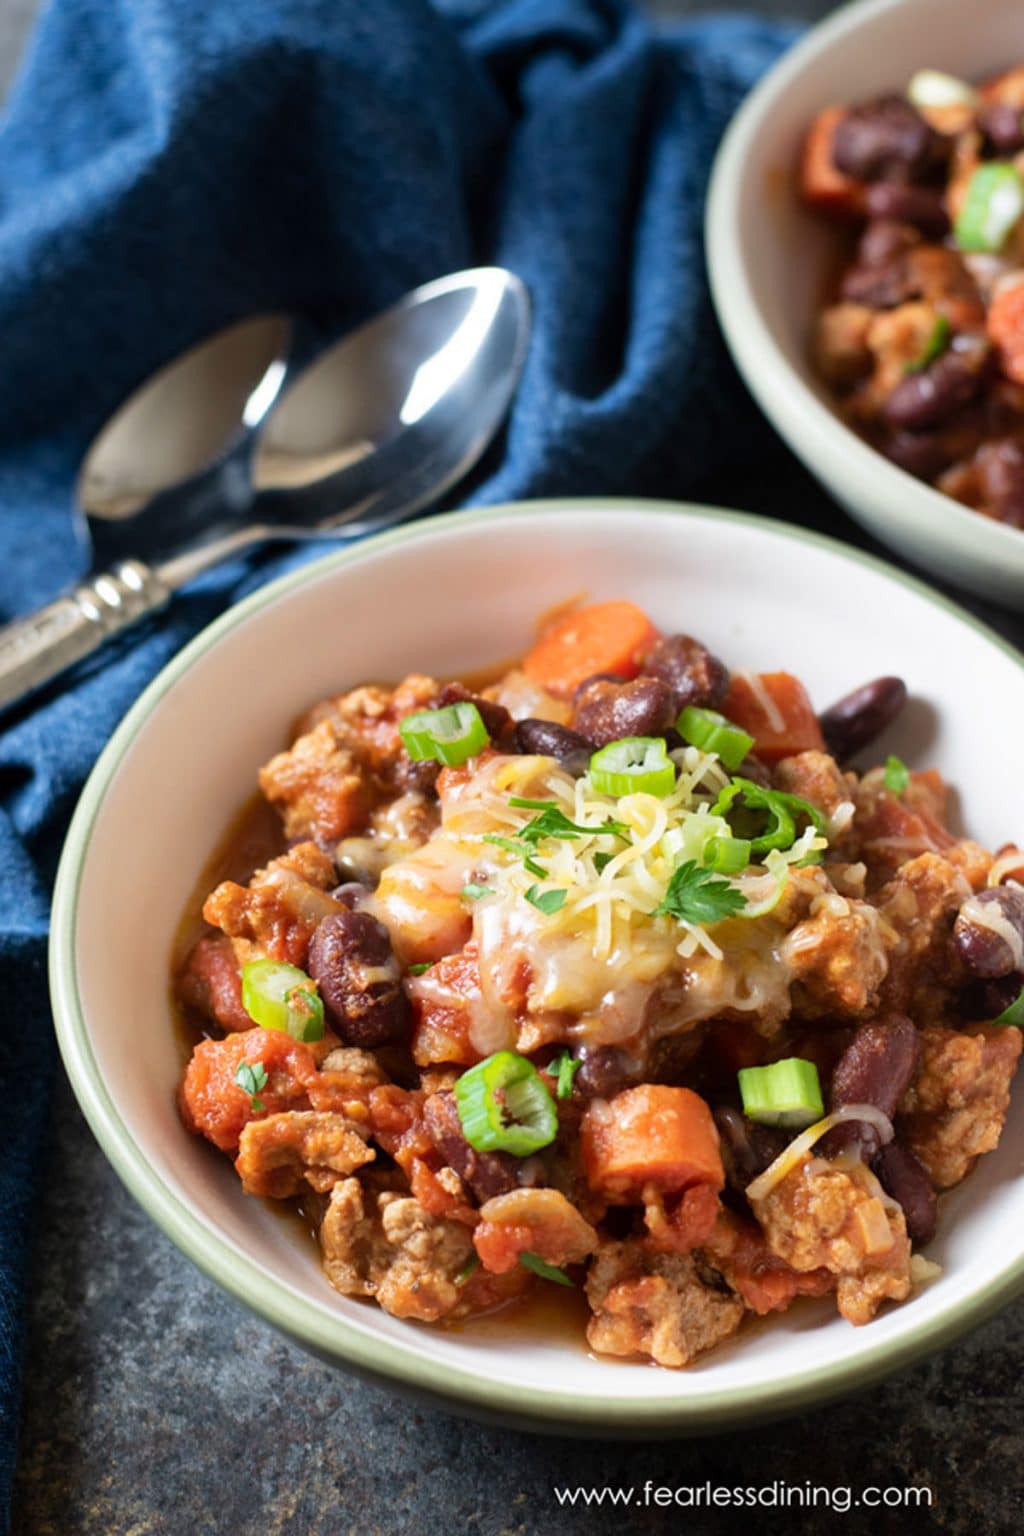 30-Minute Ground Pork Chili Recipe - Fearless Dining